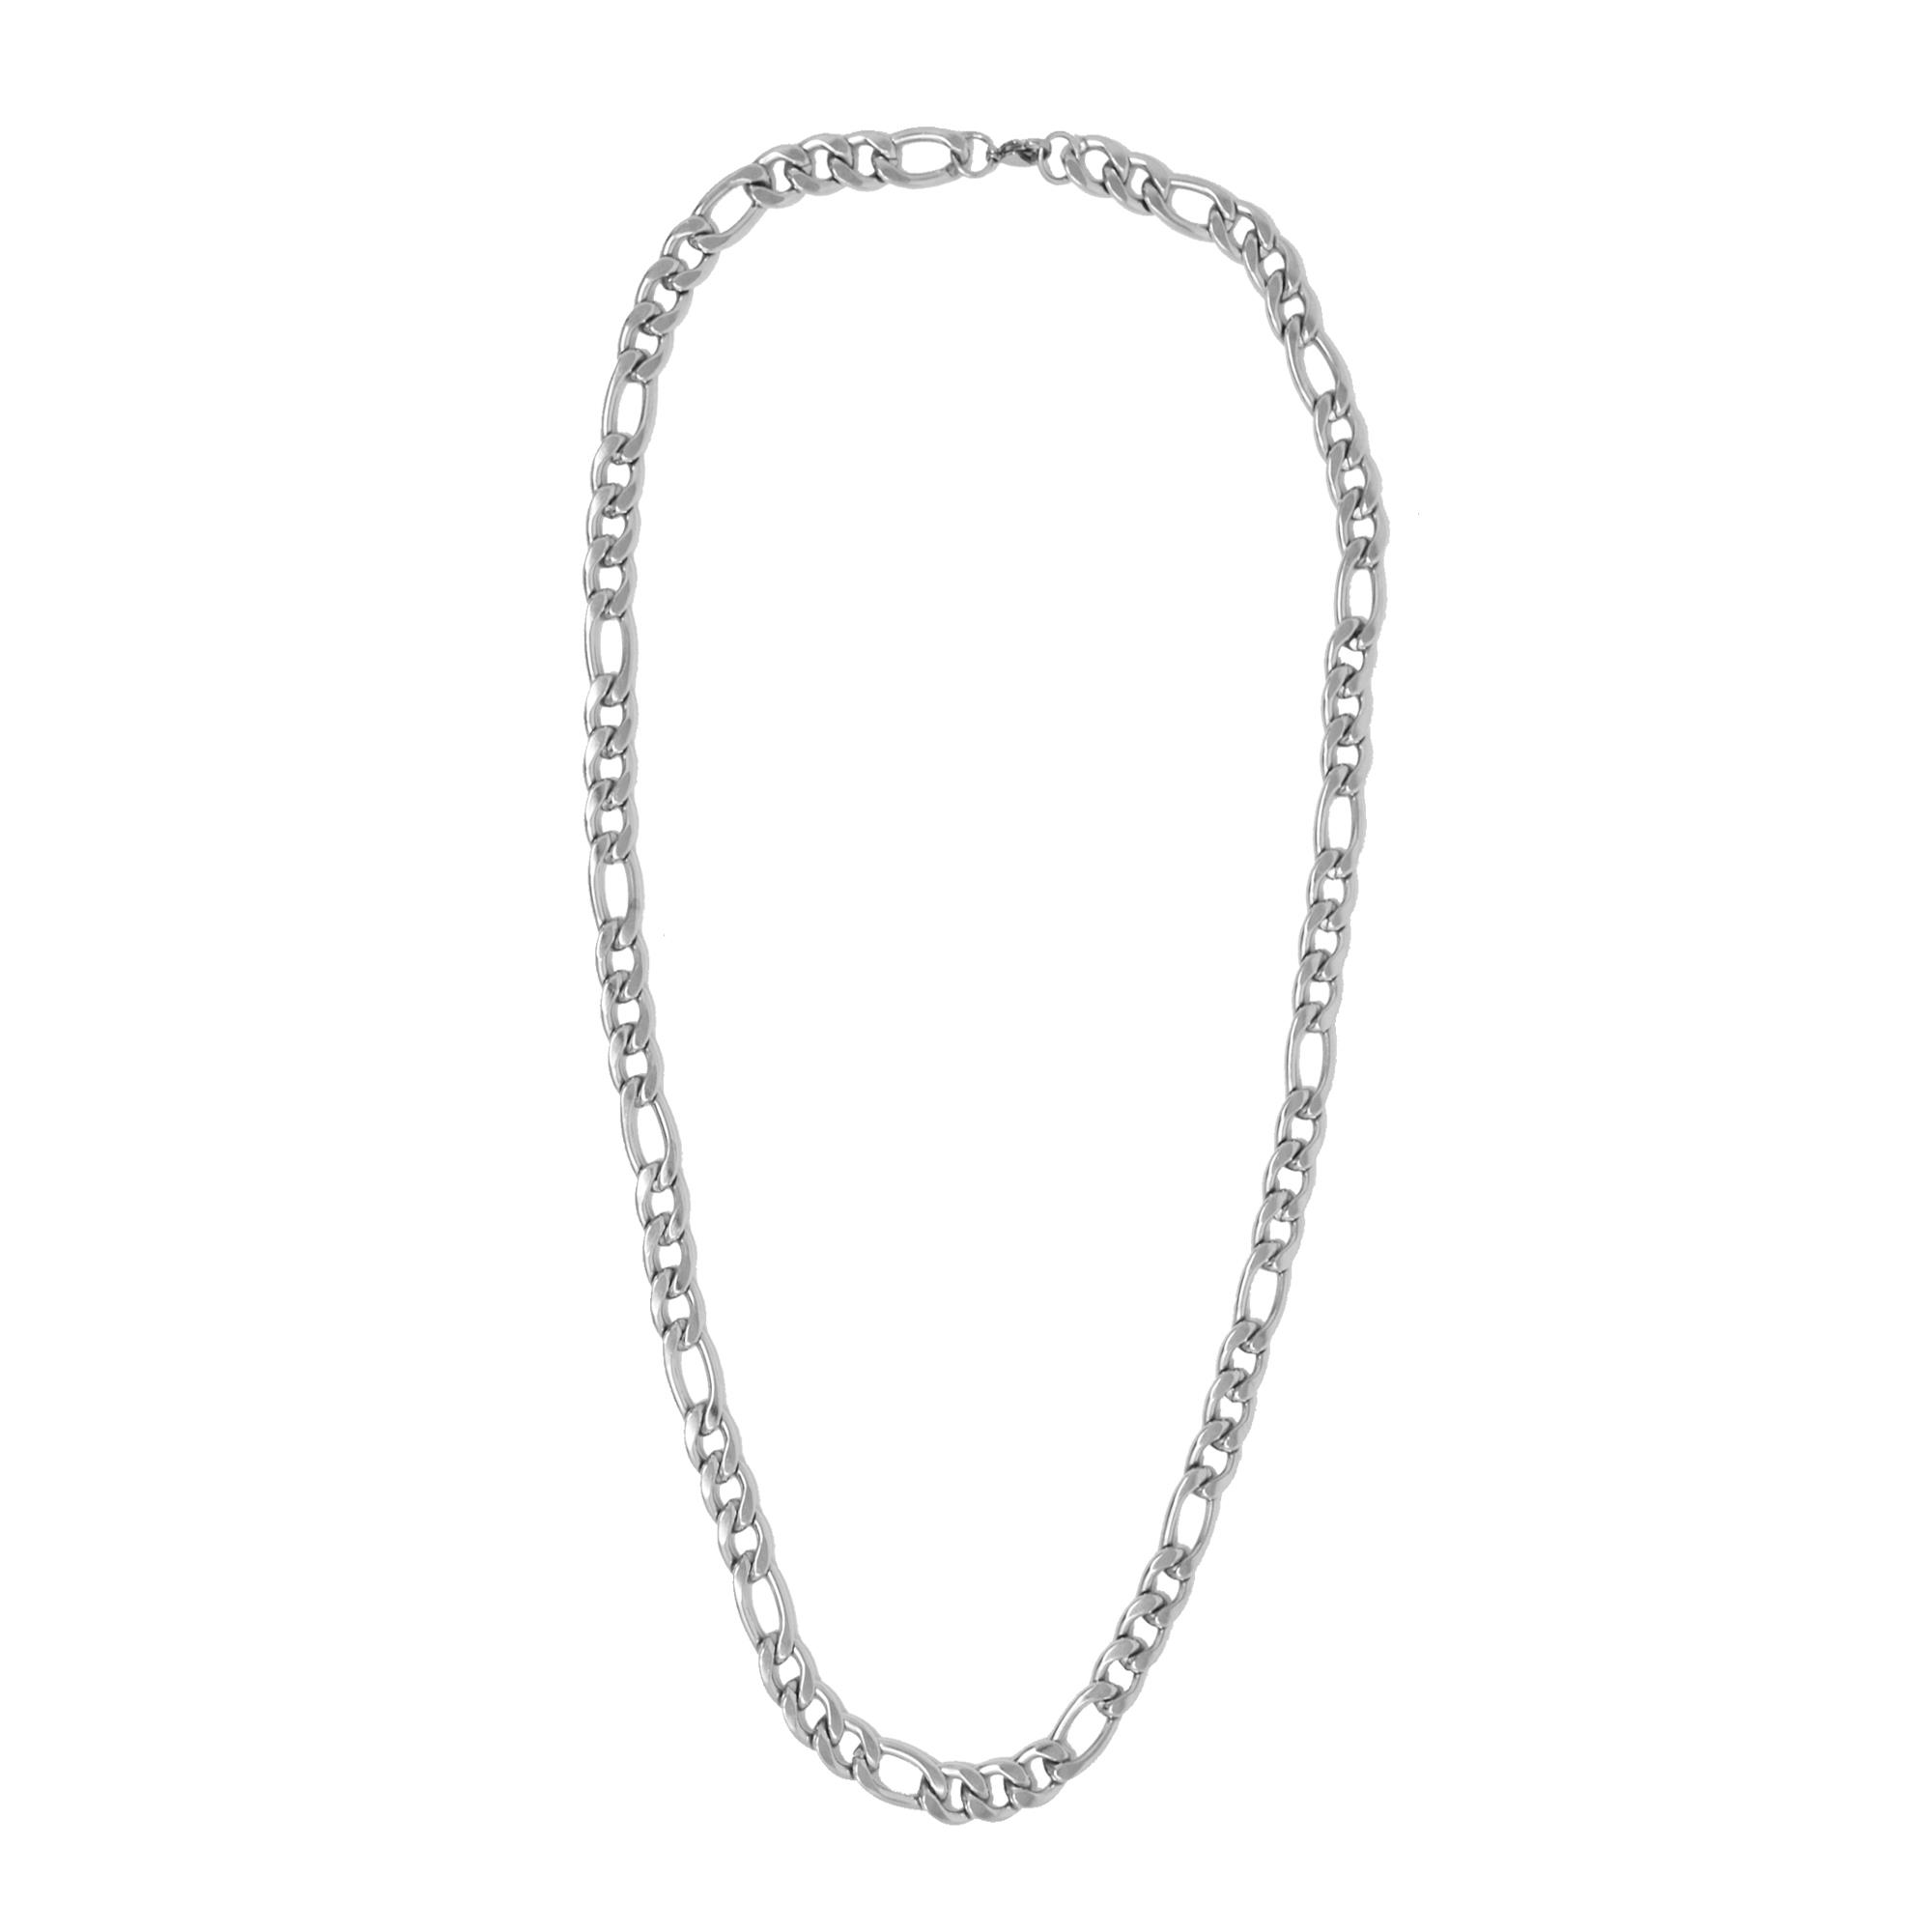 S STEEL NK 22IN/55CM FLAT SMALL CHAIN LINK